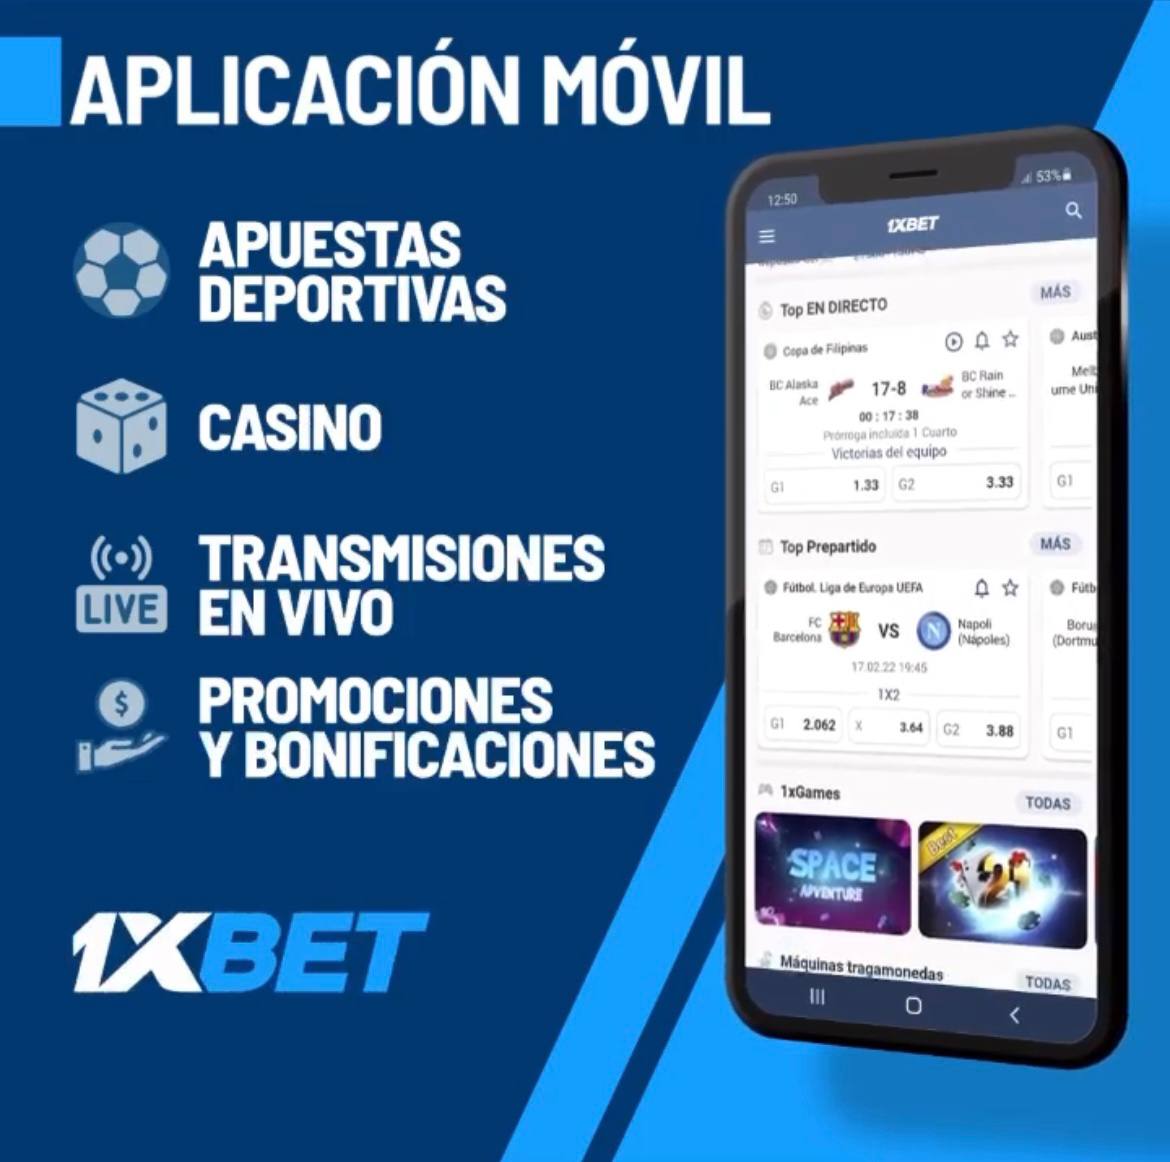 1xbet App Chile